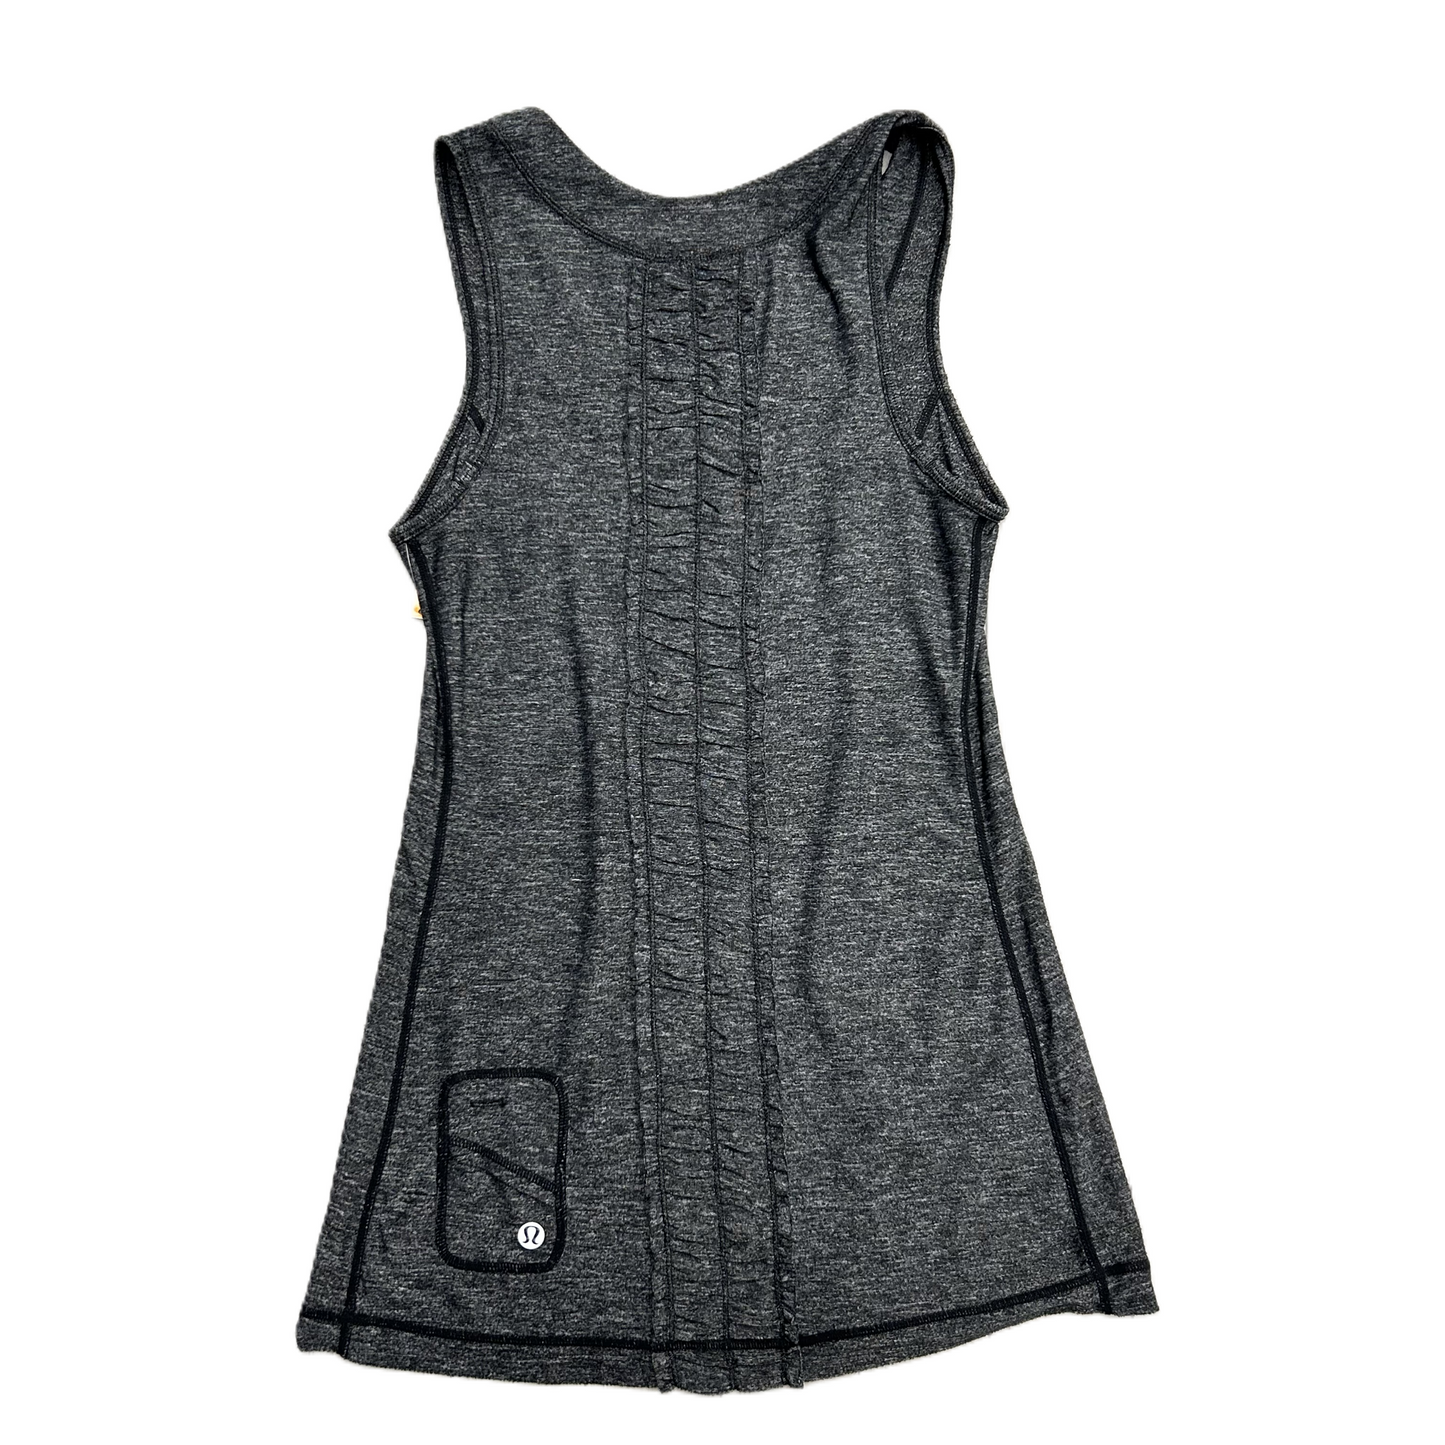 Grey Athletic Tank Top By Lululemon, Size: 4